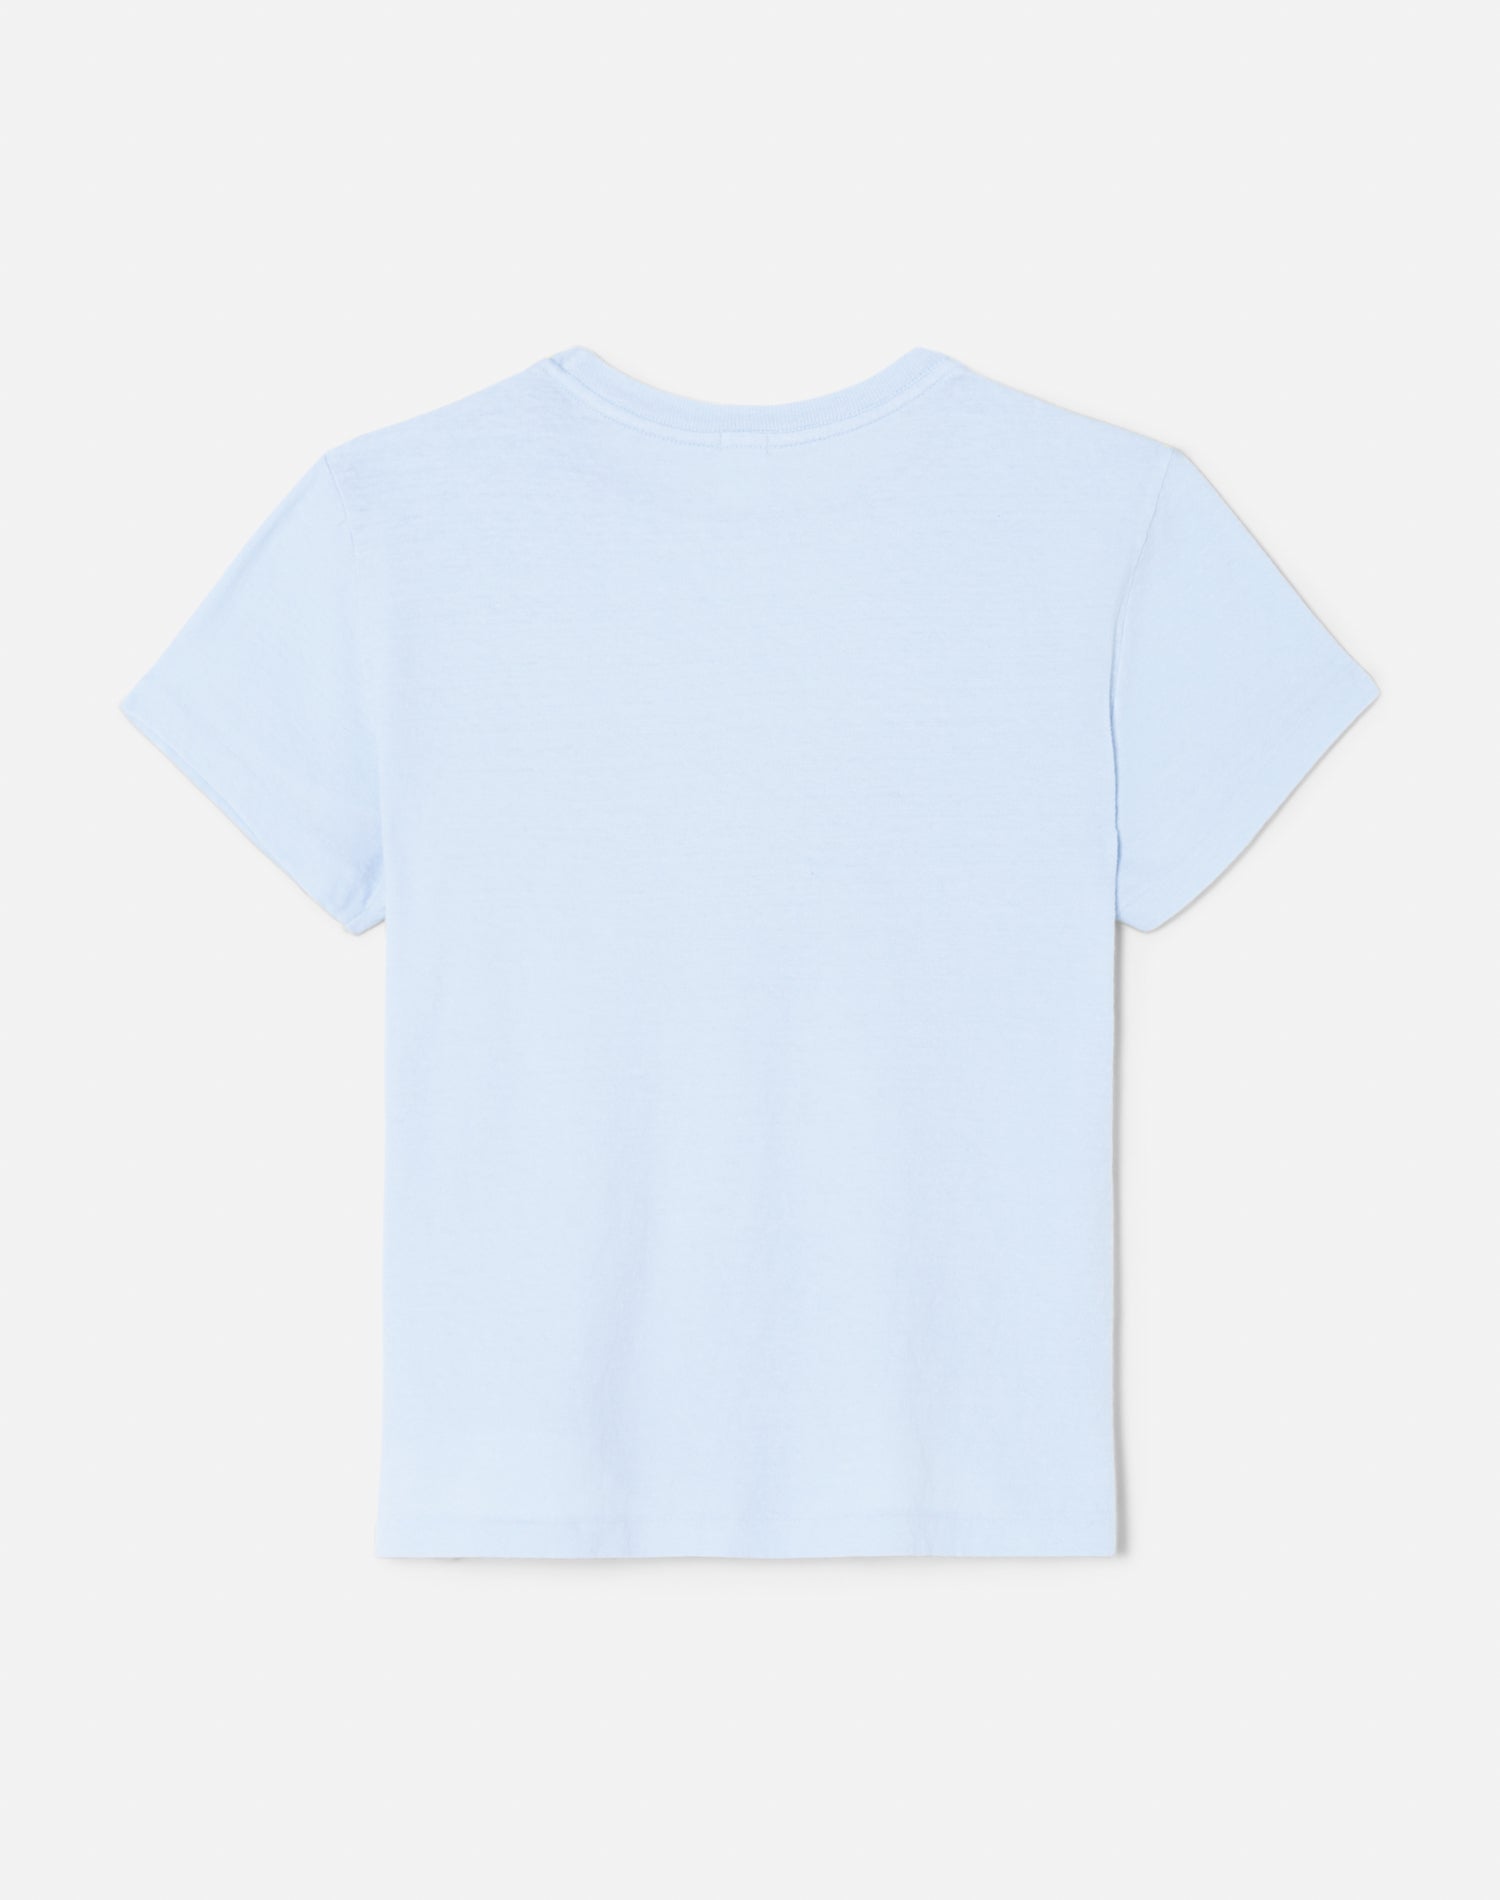 Classic "Snoopy Love" Tee - Baby Blue